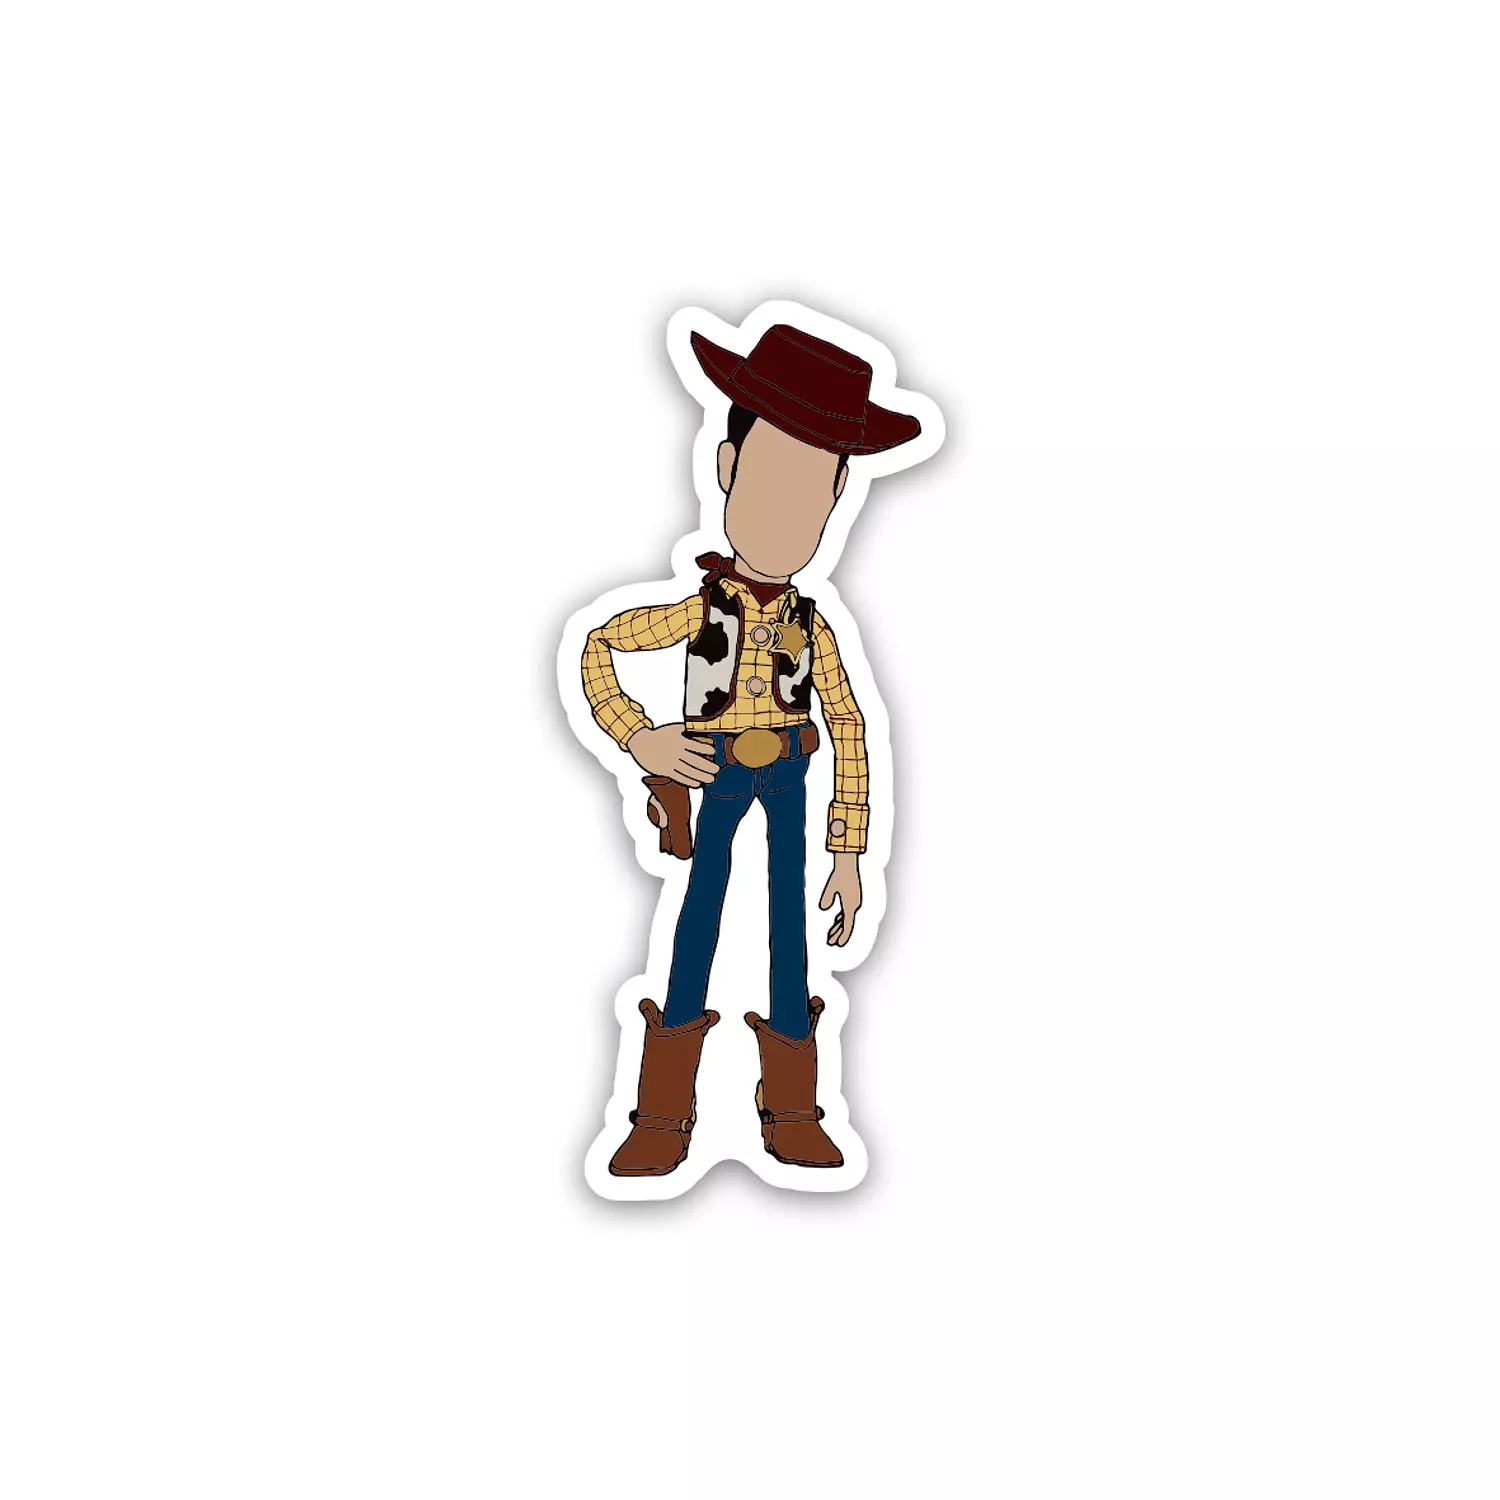 Woody - Toy Story  hover image